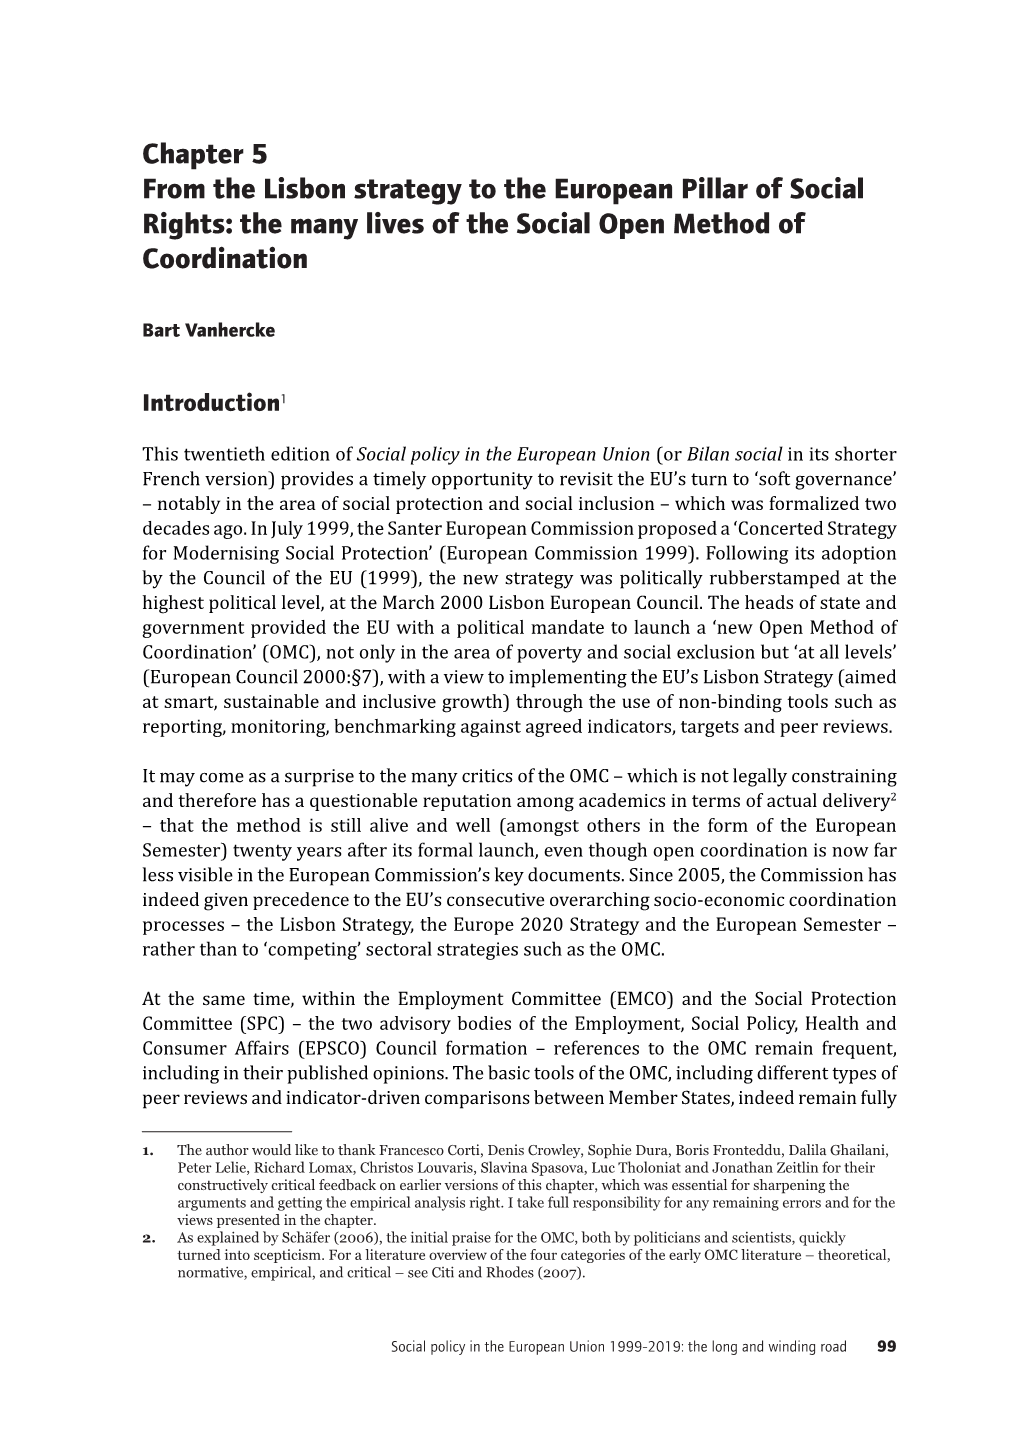 Chapter 5 from the Lisbon Strategy to the European Pillar of Social Rights: the Many Lives of the Social Open Method of Coordination